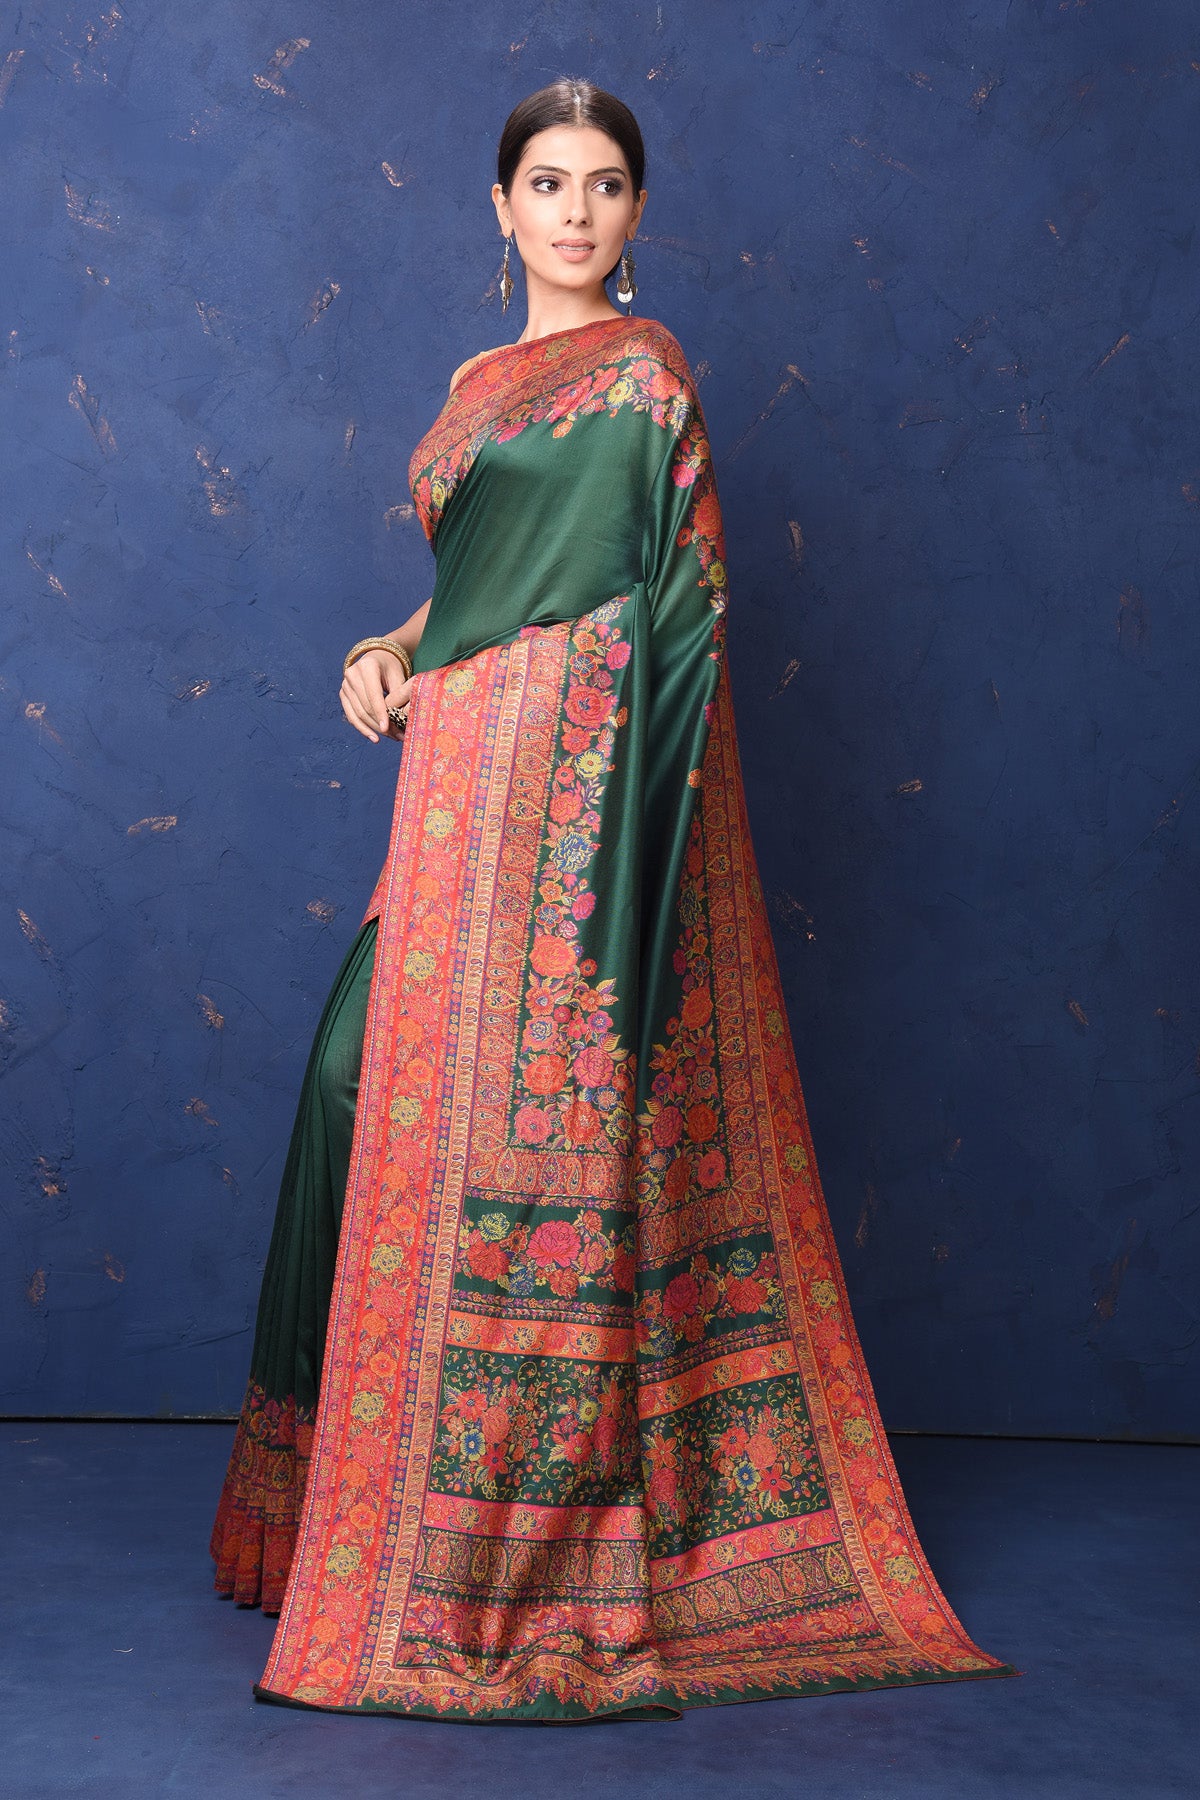 Shop gorgeous red tussar muga silk sari online in USA with Kani border. Buy latest designer sarees, handloom saris, embroidered sarees, Bollywood sarees, fancy sarees for special occasions from Pure Elegance Indian fashion store in USA. Shop soft silk sarees, pure Banarasi sarees, cotton sarees, georgette sarees.-pallu